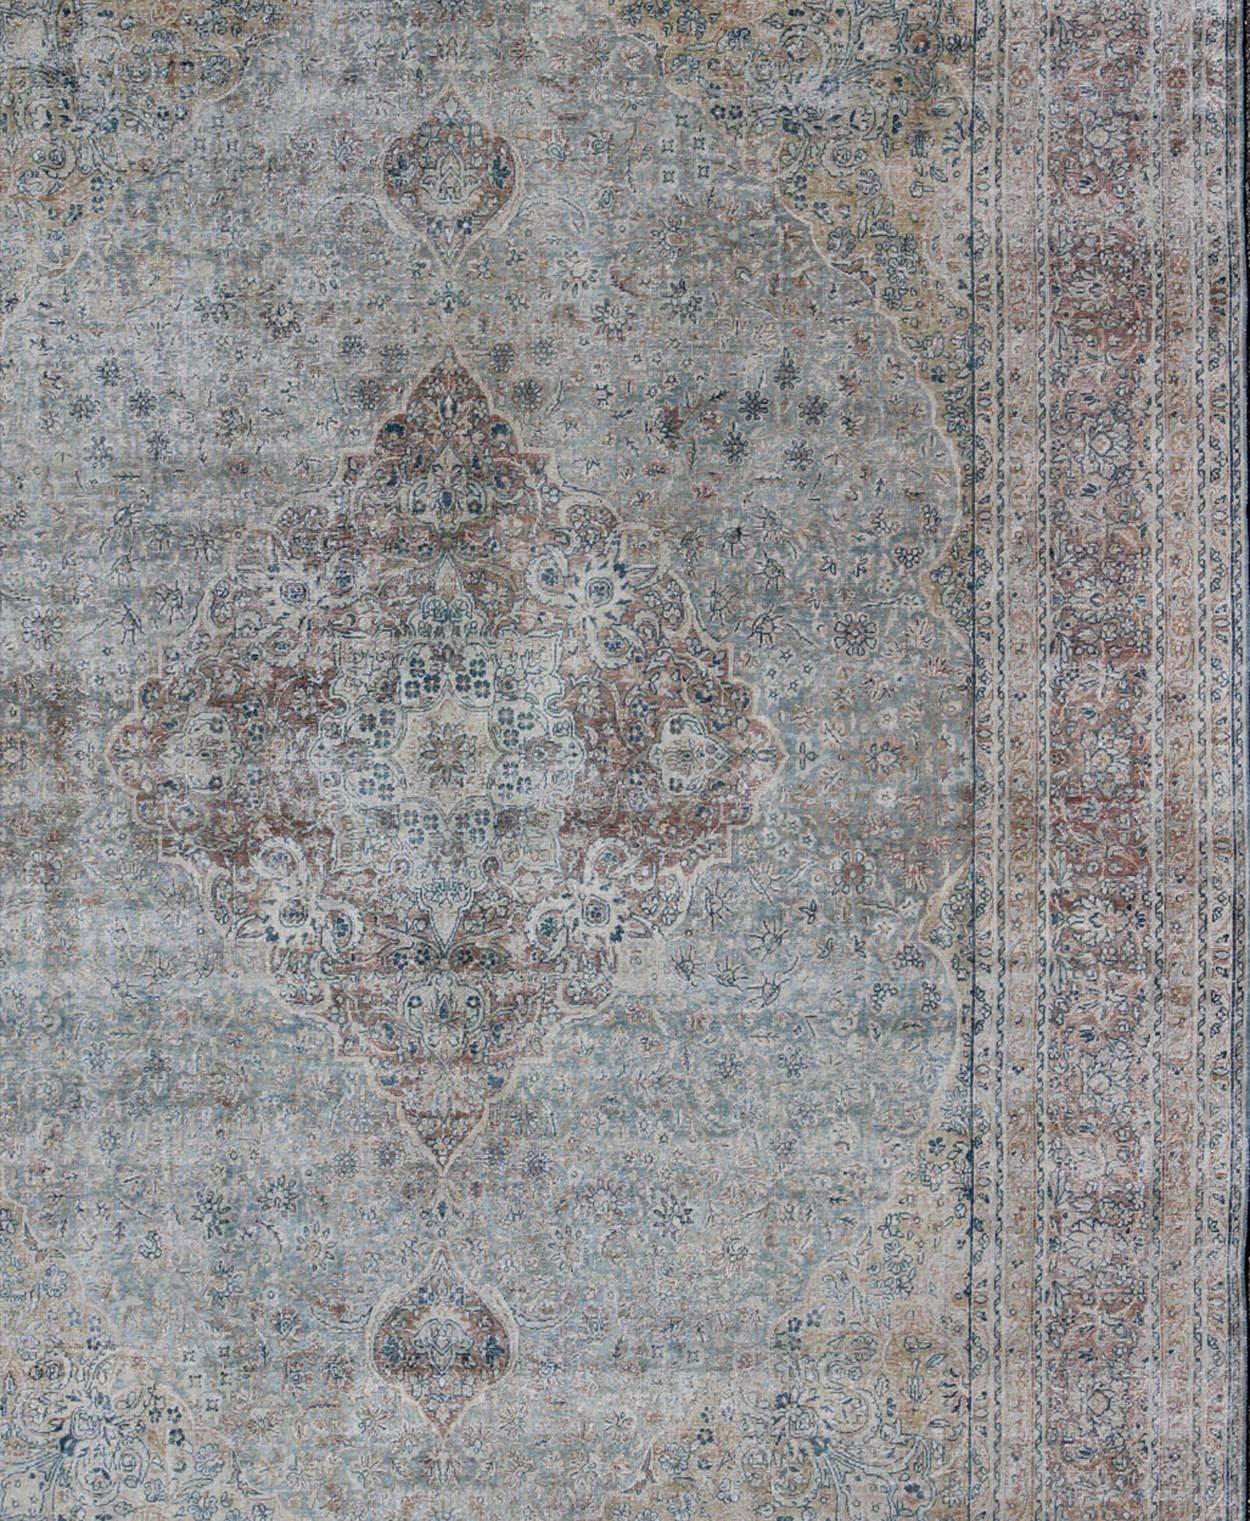 Hand-Knotted Antique Persian Tabriz Rug with Medallion Design in Grayish Blue, Gold, Brown